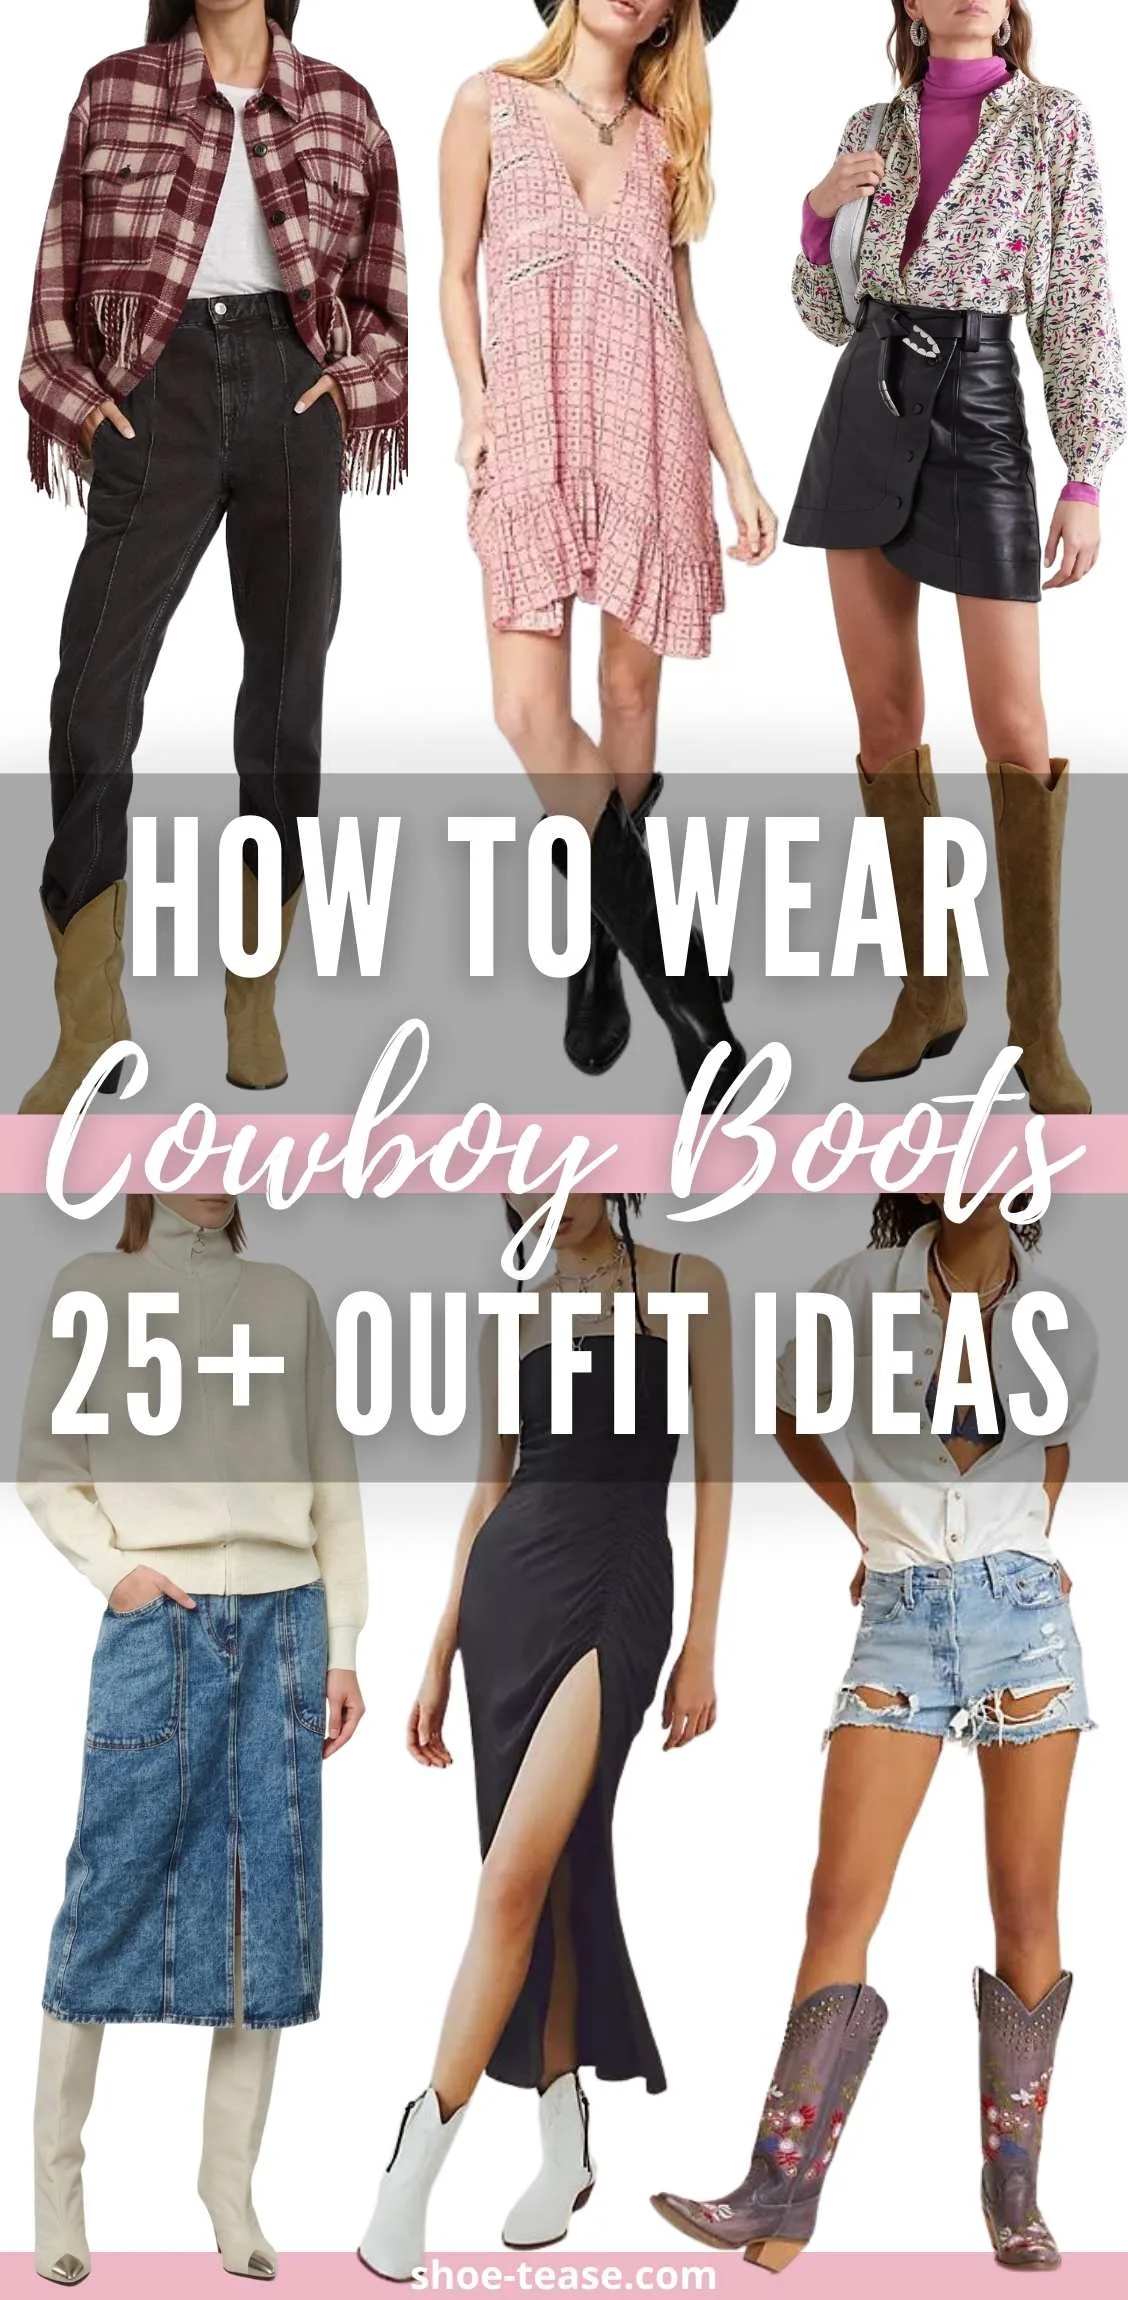 How to Wear Cowboy Boots Outfits in 2023 - 25+ Chic Women's Outfits